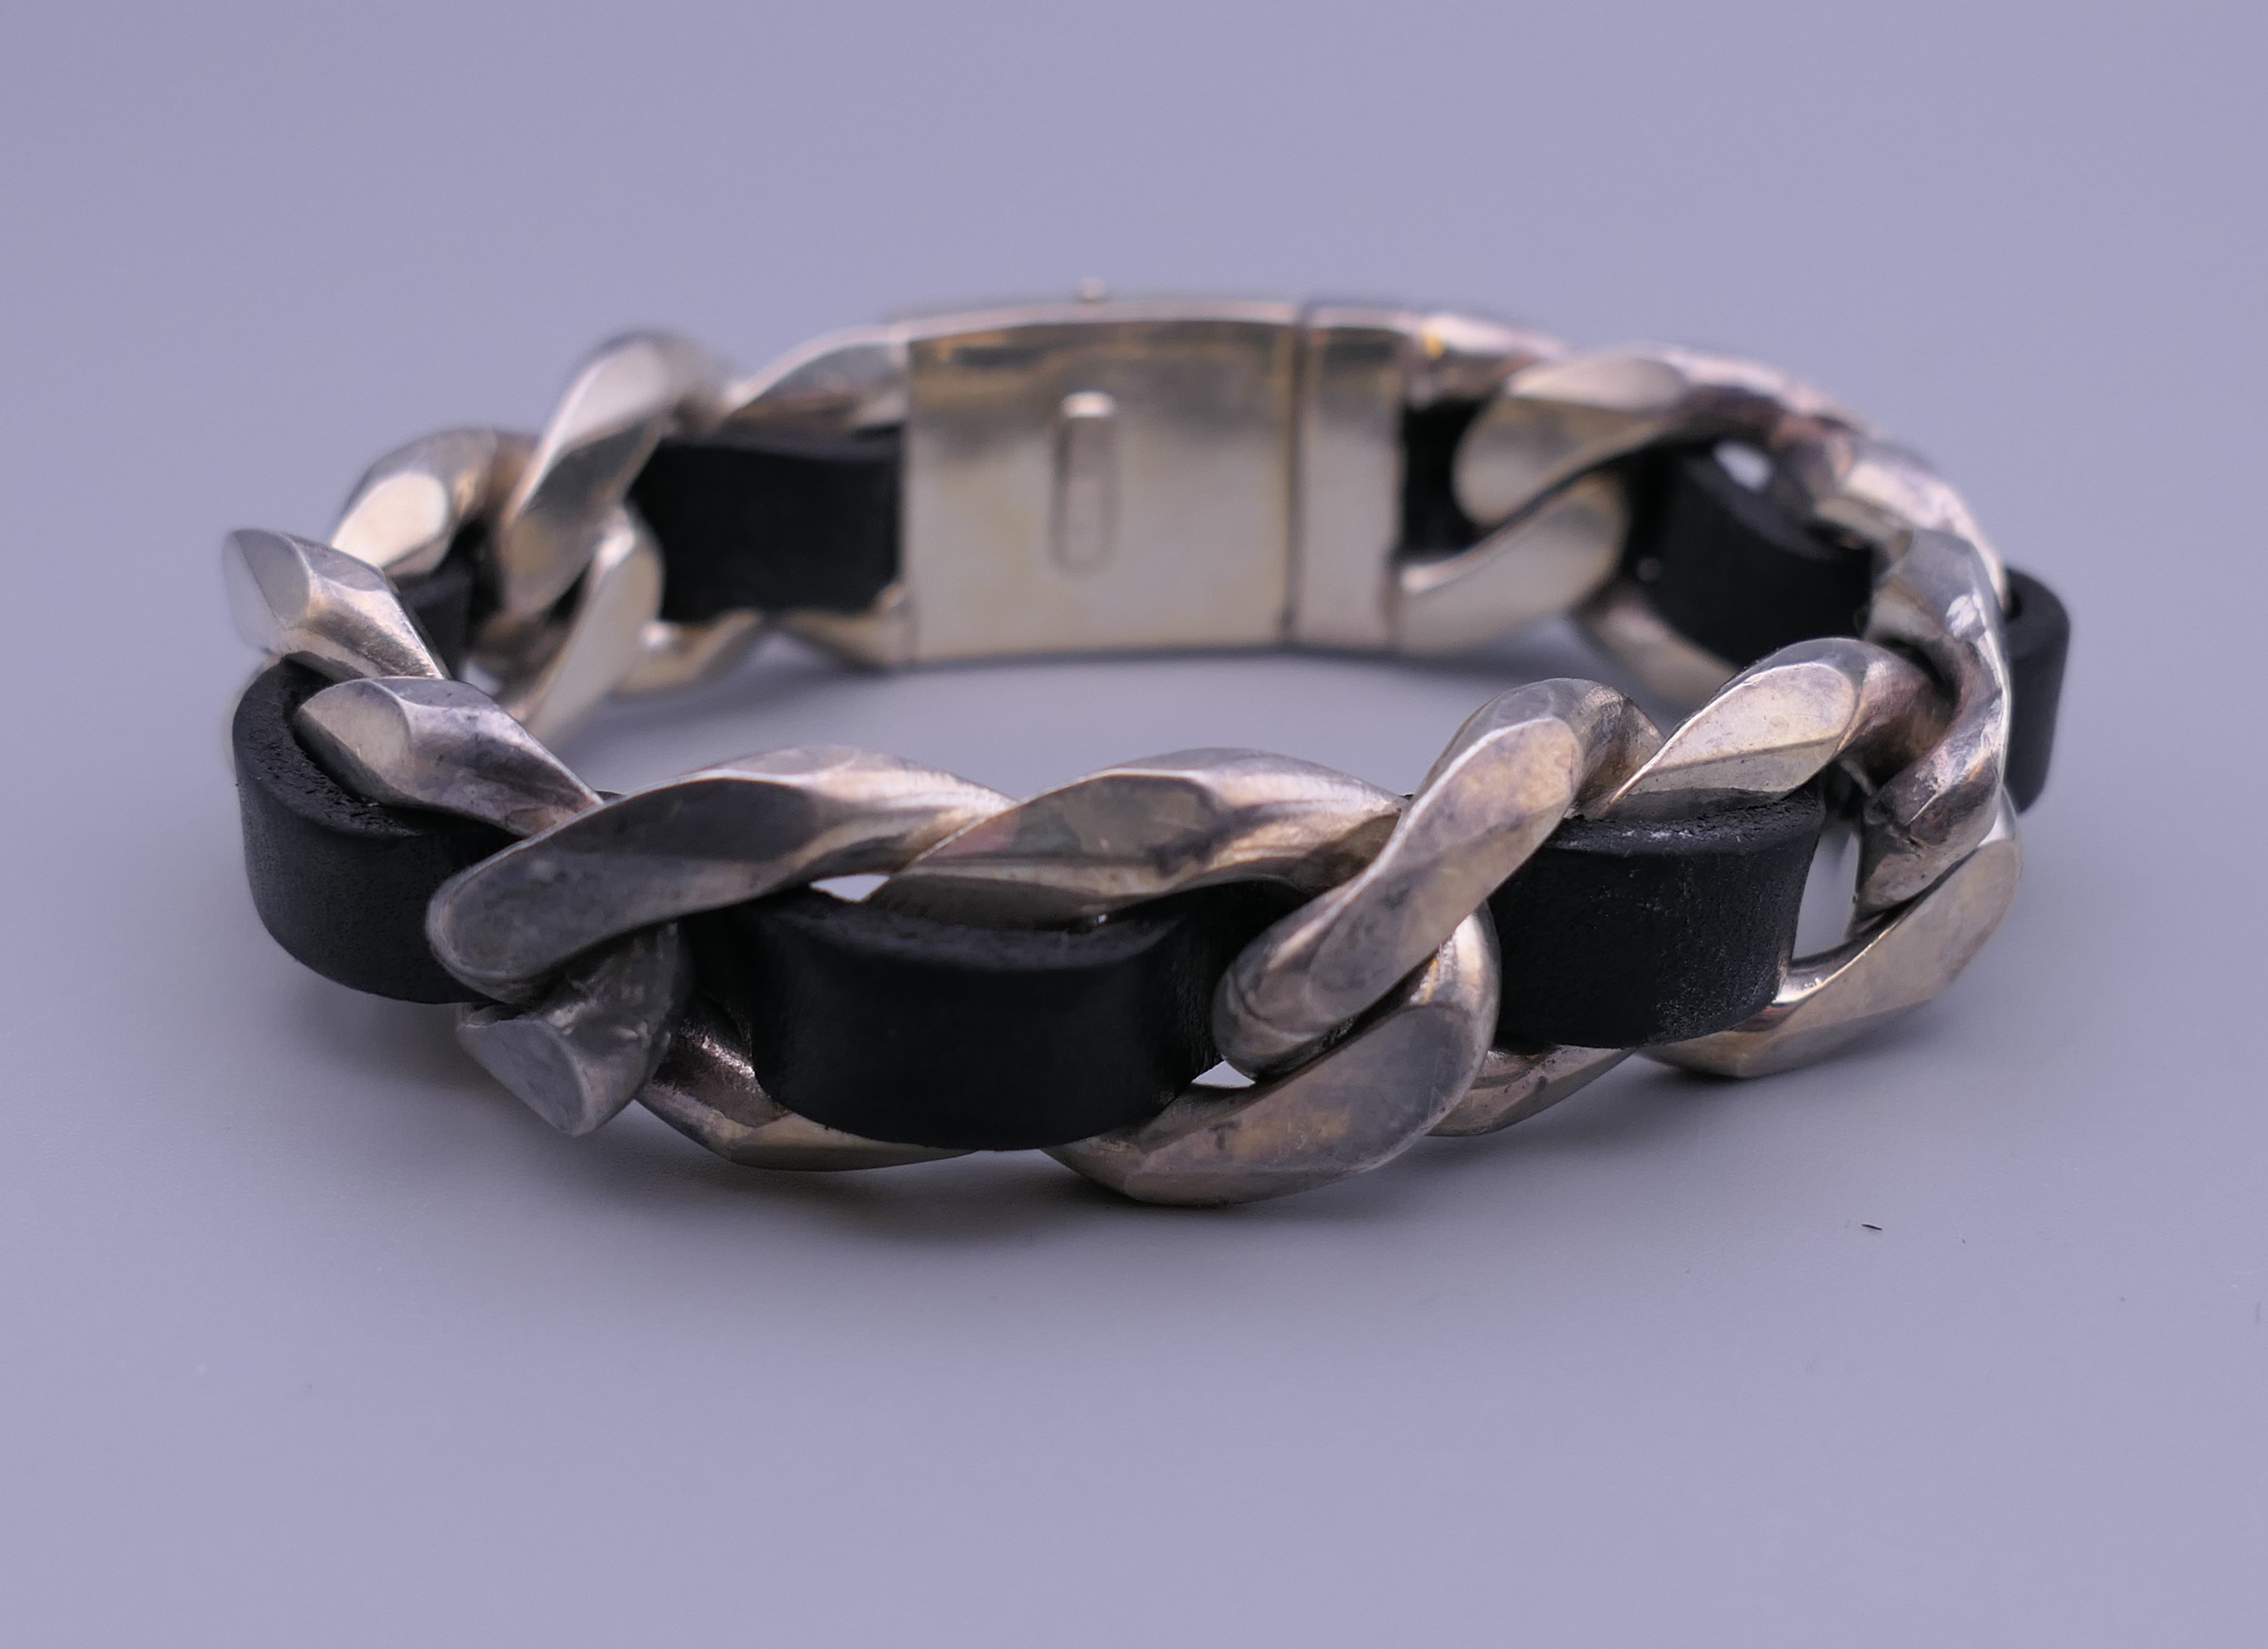 A silver and black leather bracelet.